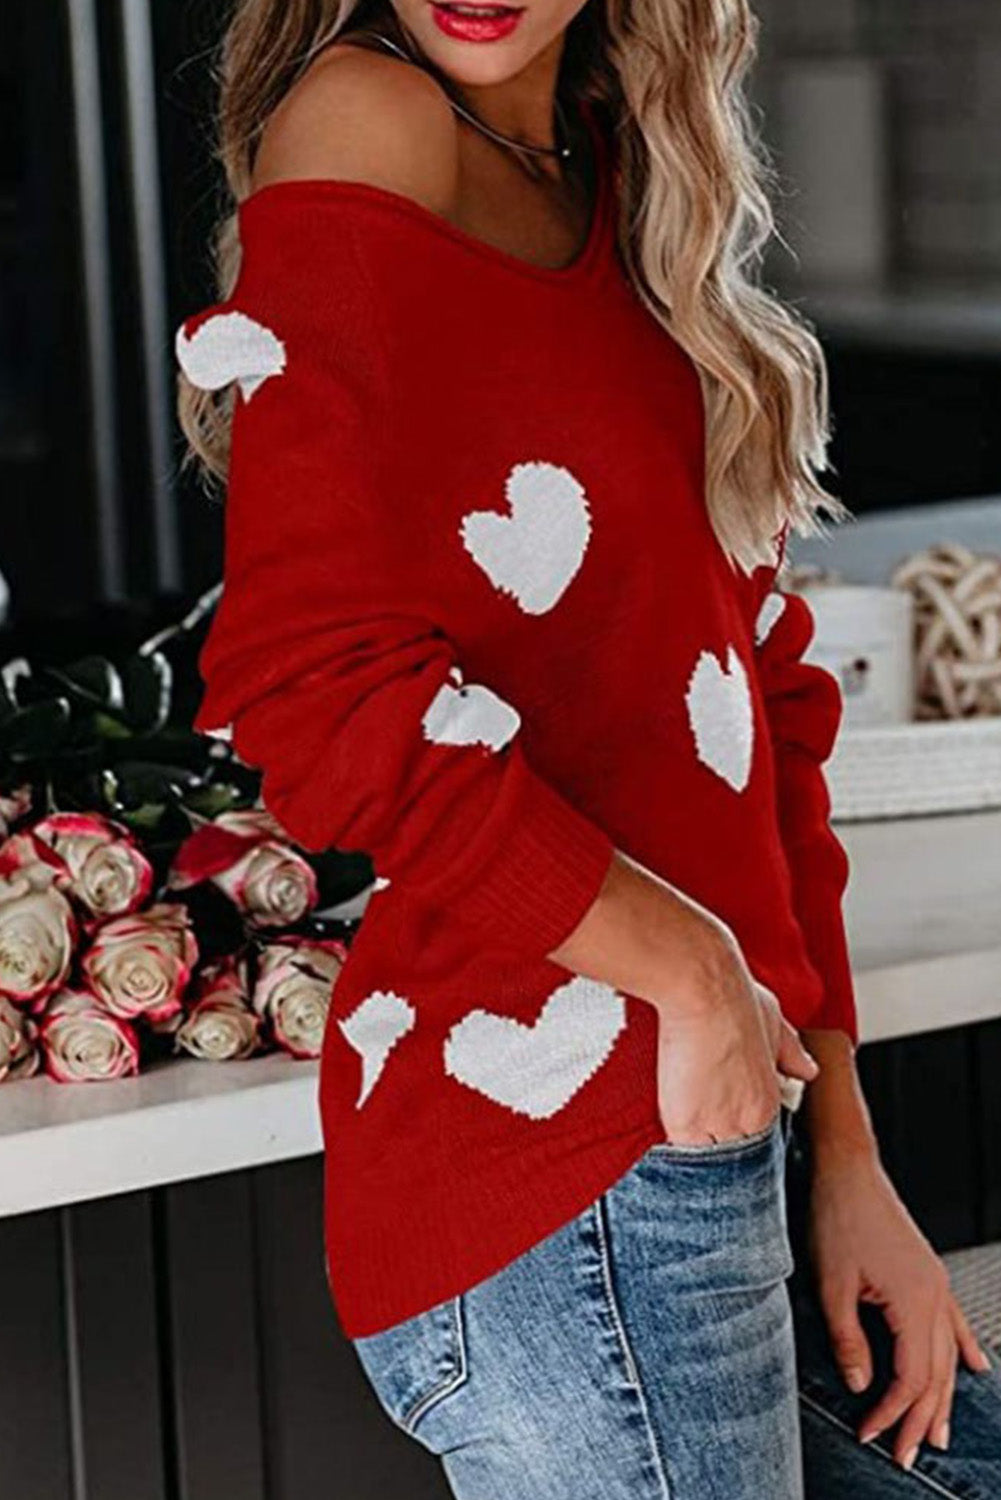 LC2722797-3-S, LC2722797-3-M, LC2722797-3-L, LC2722797-3-XL, Red Women Valentine Heart Sweater V Neck Knit Pullover Sweater